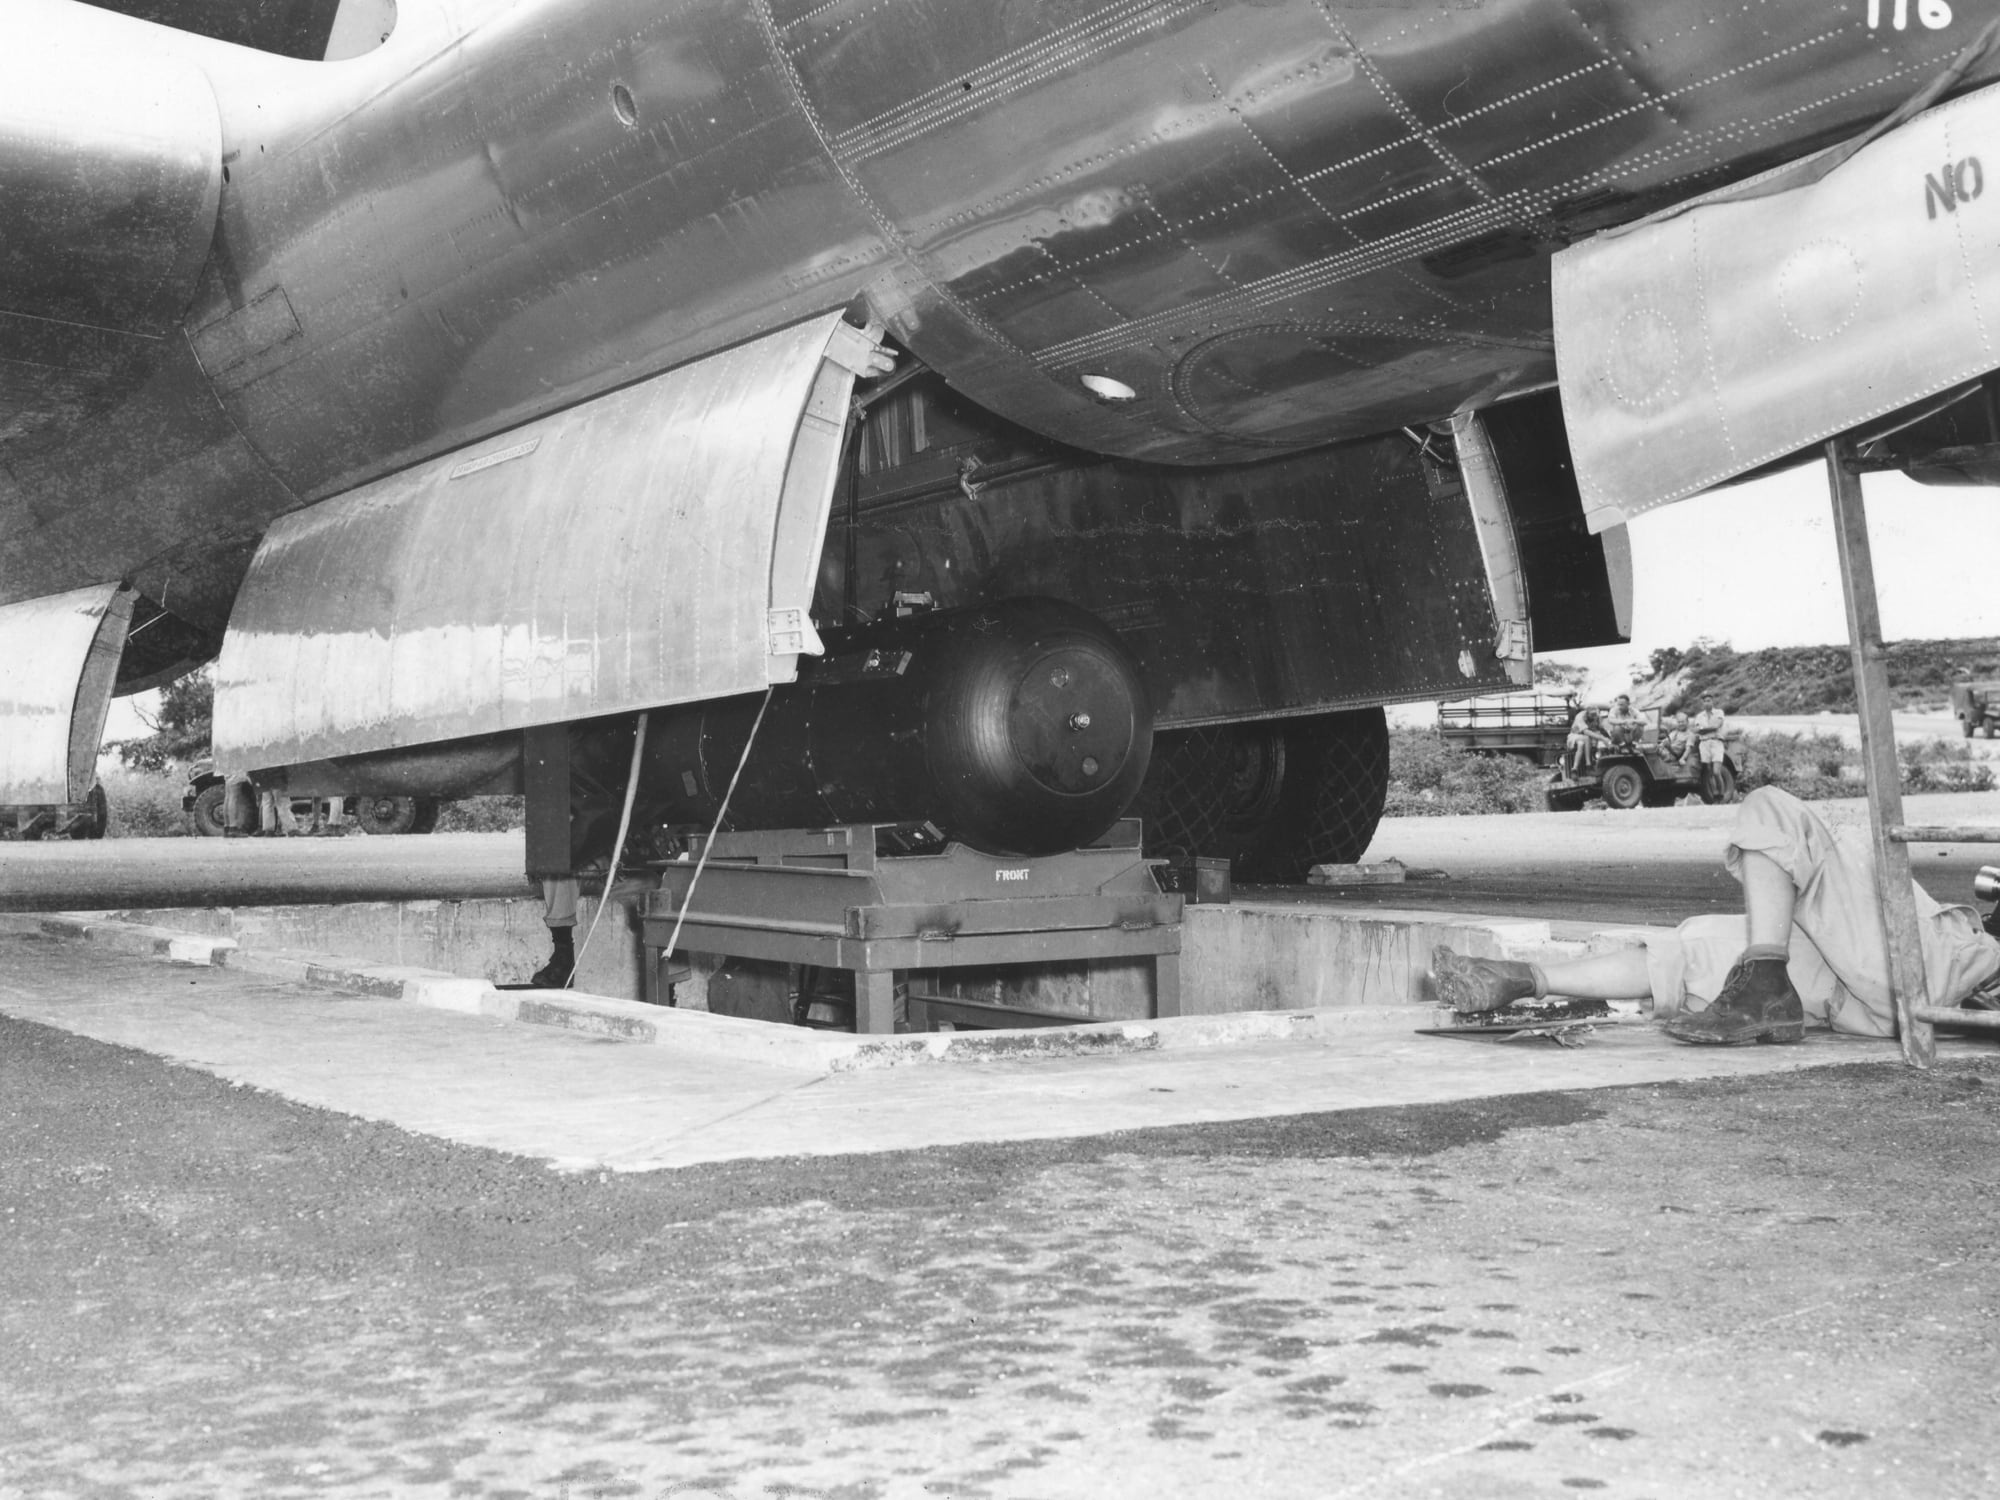 Little Boy being loaded into the Enola Gay